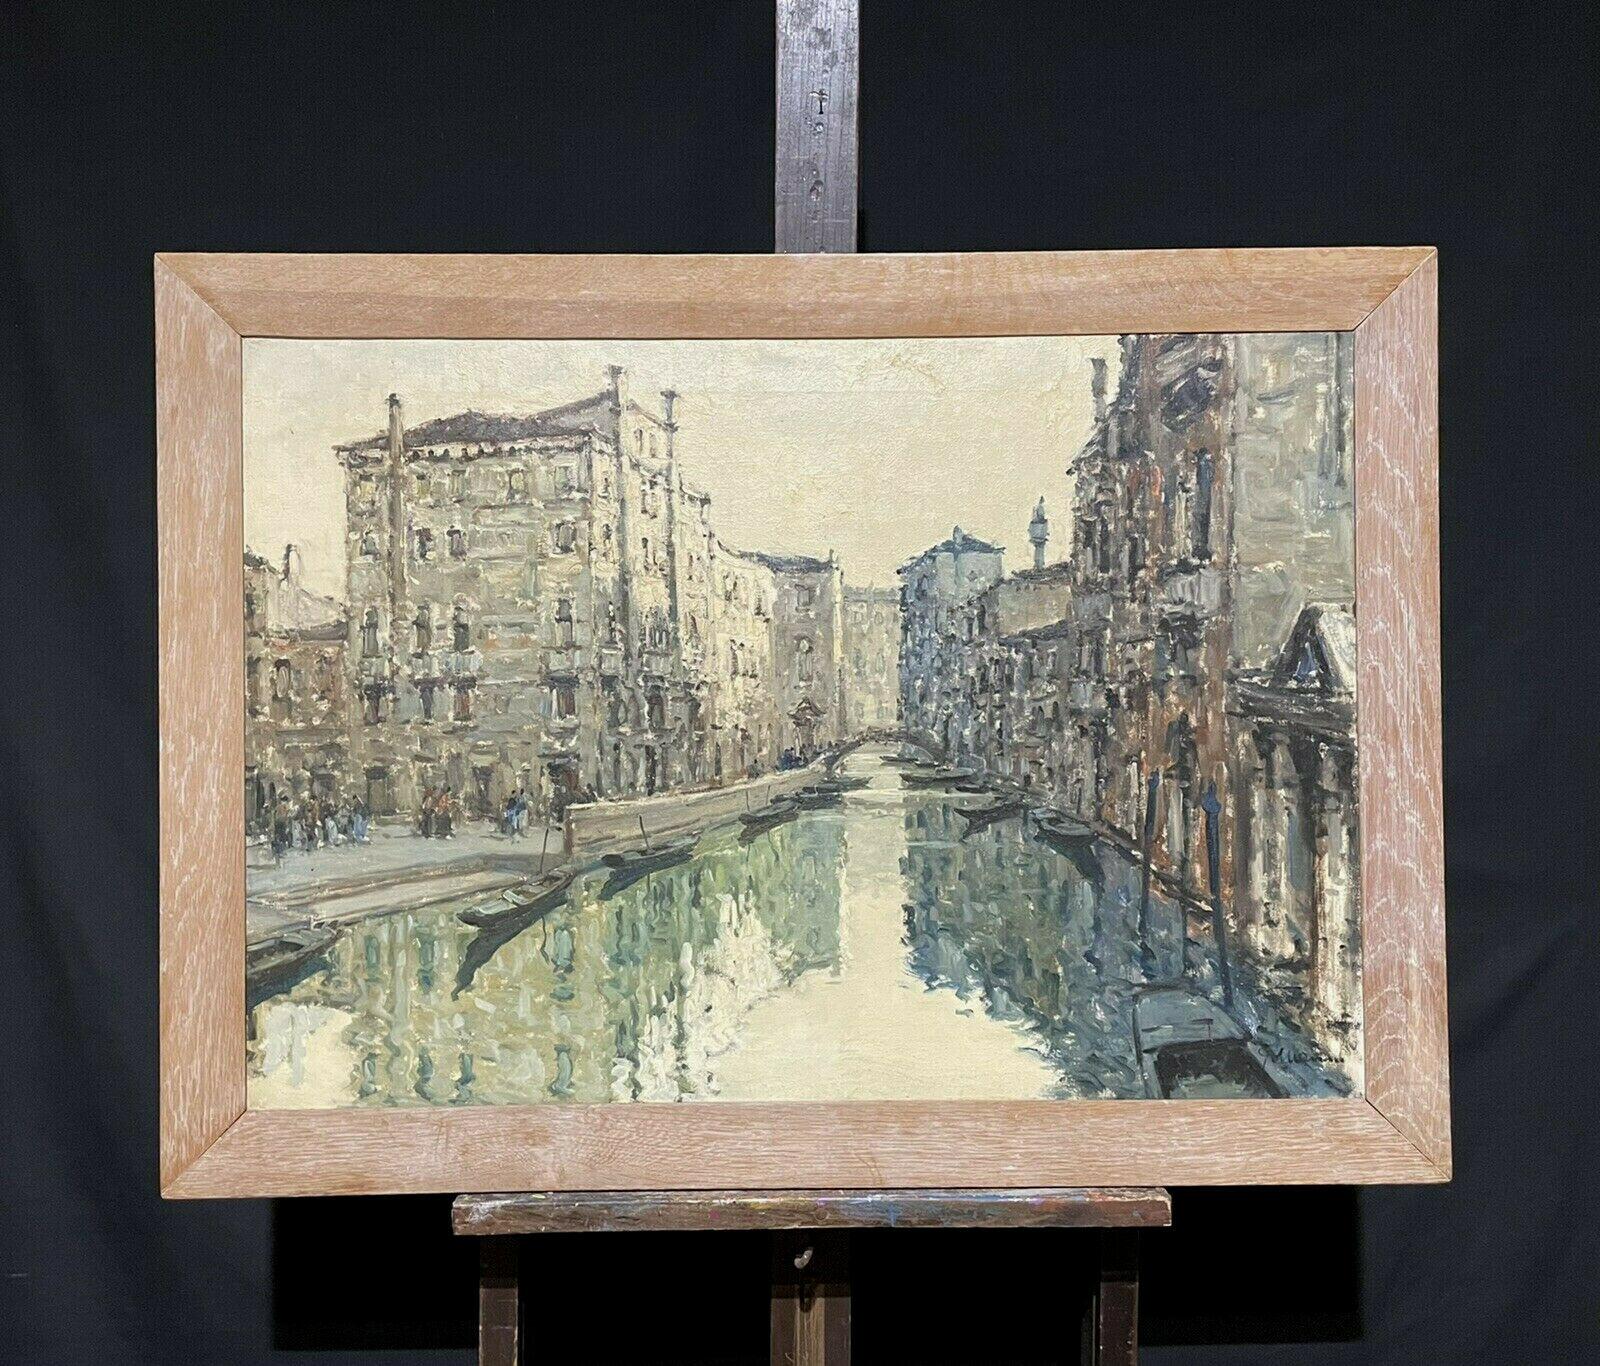 VERY LARGE 1960'S ITALIAN SIGNED OIL - IMPRESSIONIST VENICE TRANQUIL CANAL SCENE - Painting by Italian artist